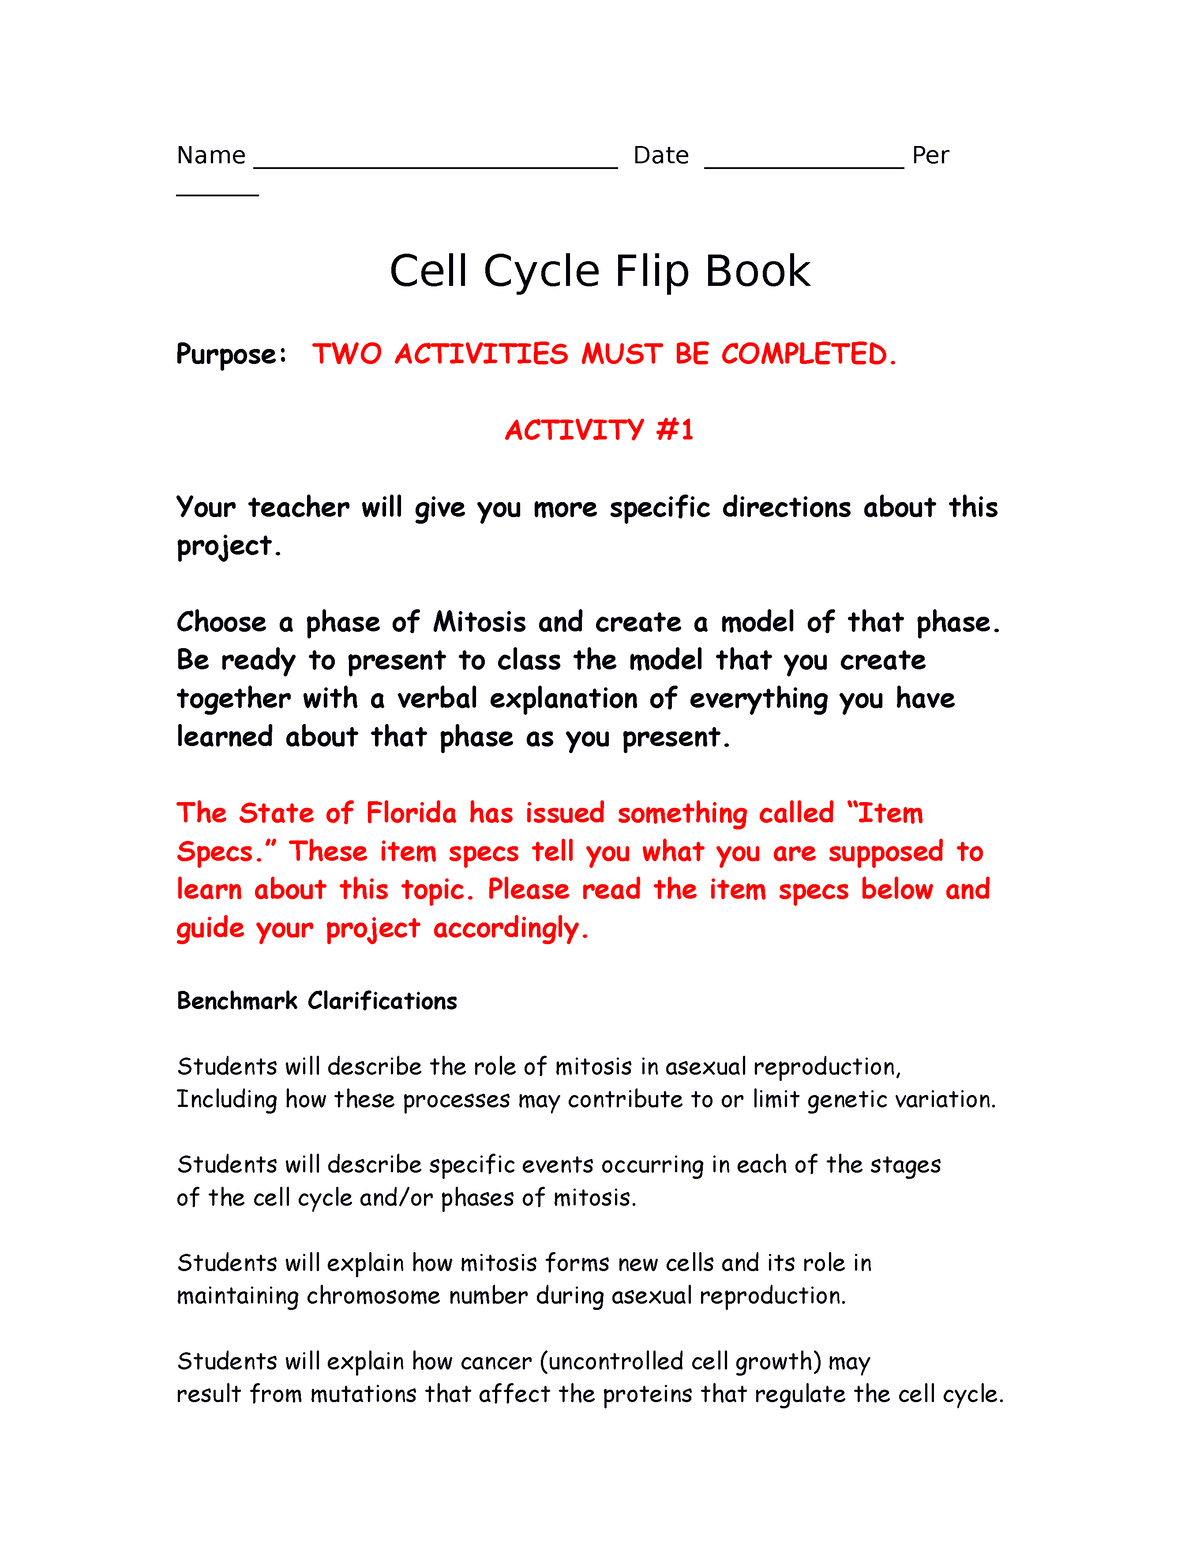 the cell cycle mitosis flip book